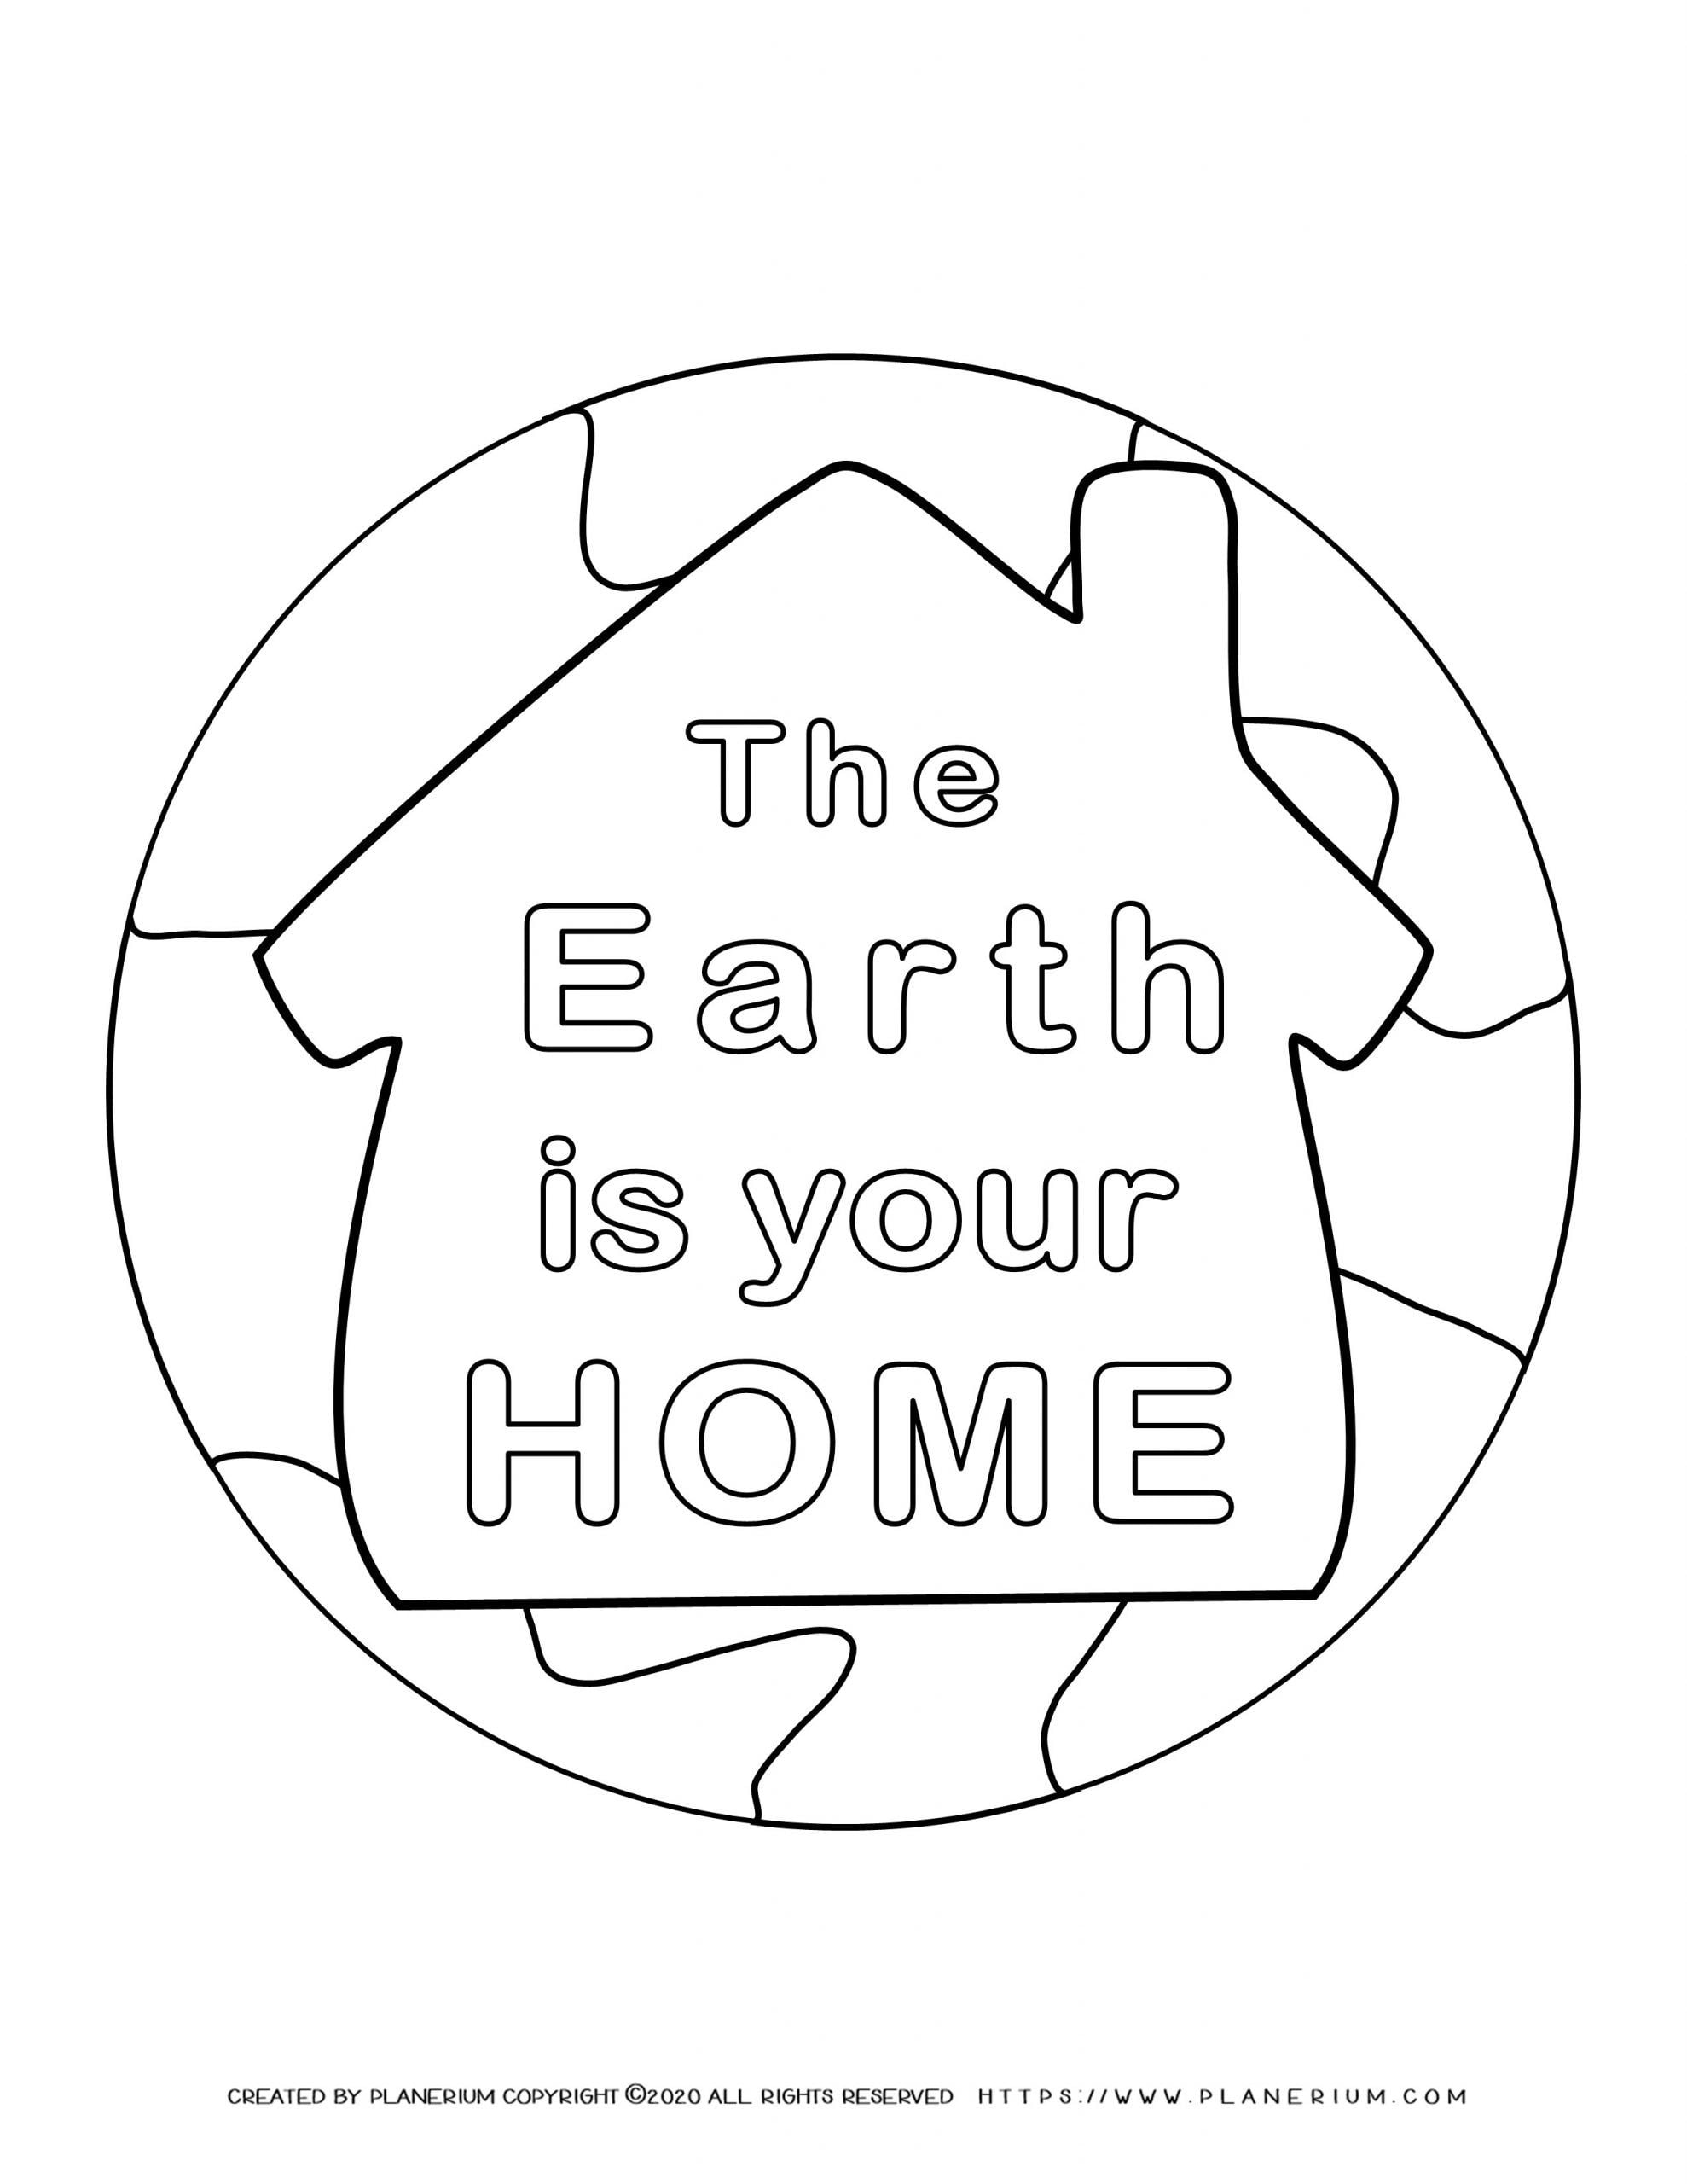 Earth day - Coloring page - Earth is your Home